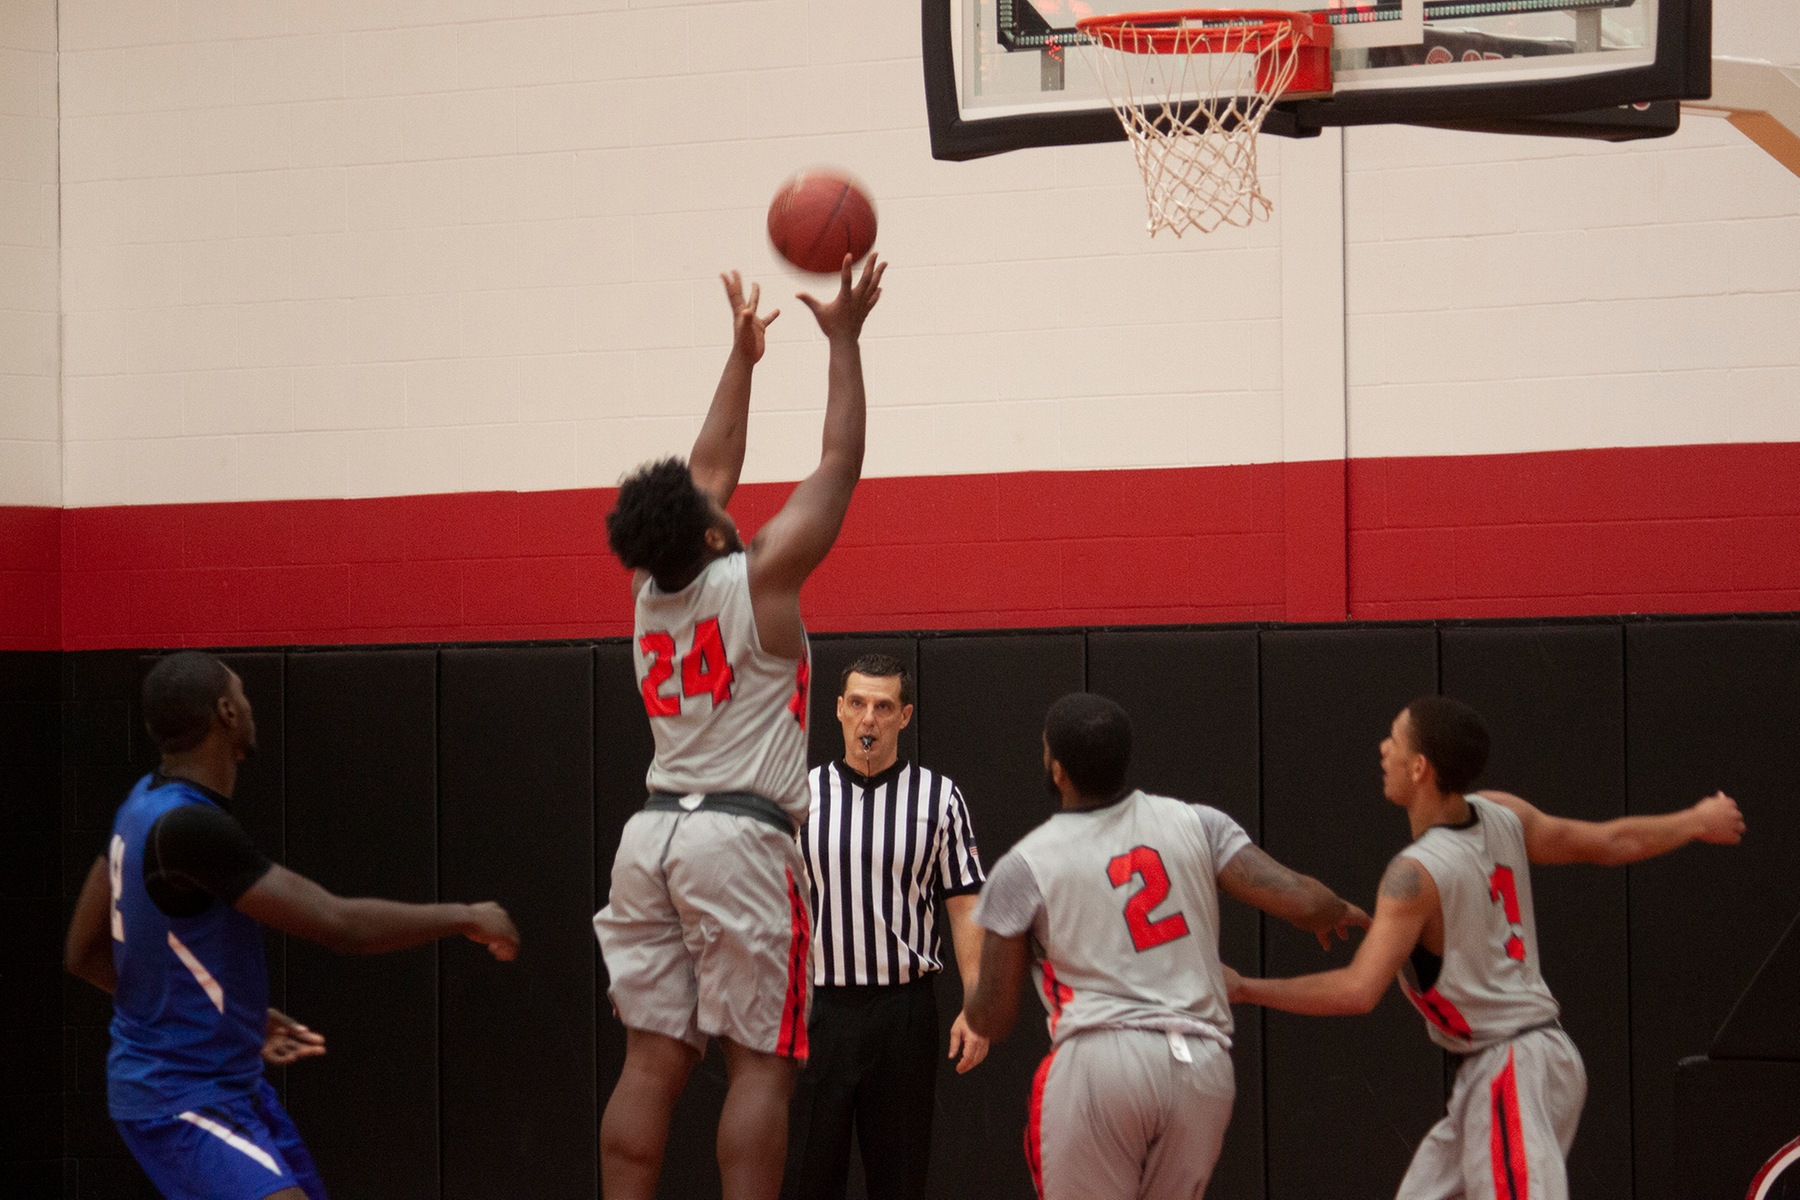 Cayuga's Lutrell Vivians grabs a rebound against Fulton-Montgomery Community College earlier this season. Photo courtesy of The Cayuga Collegian.